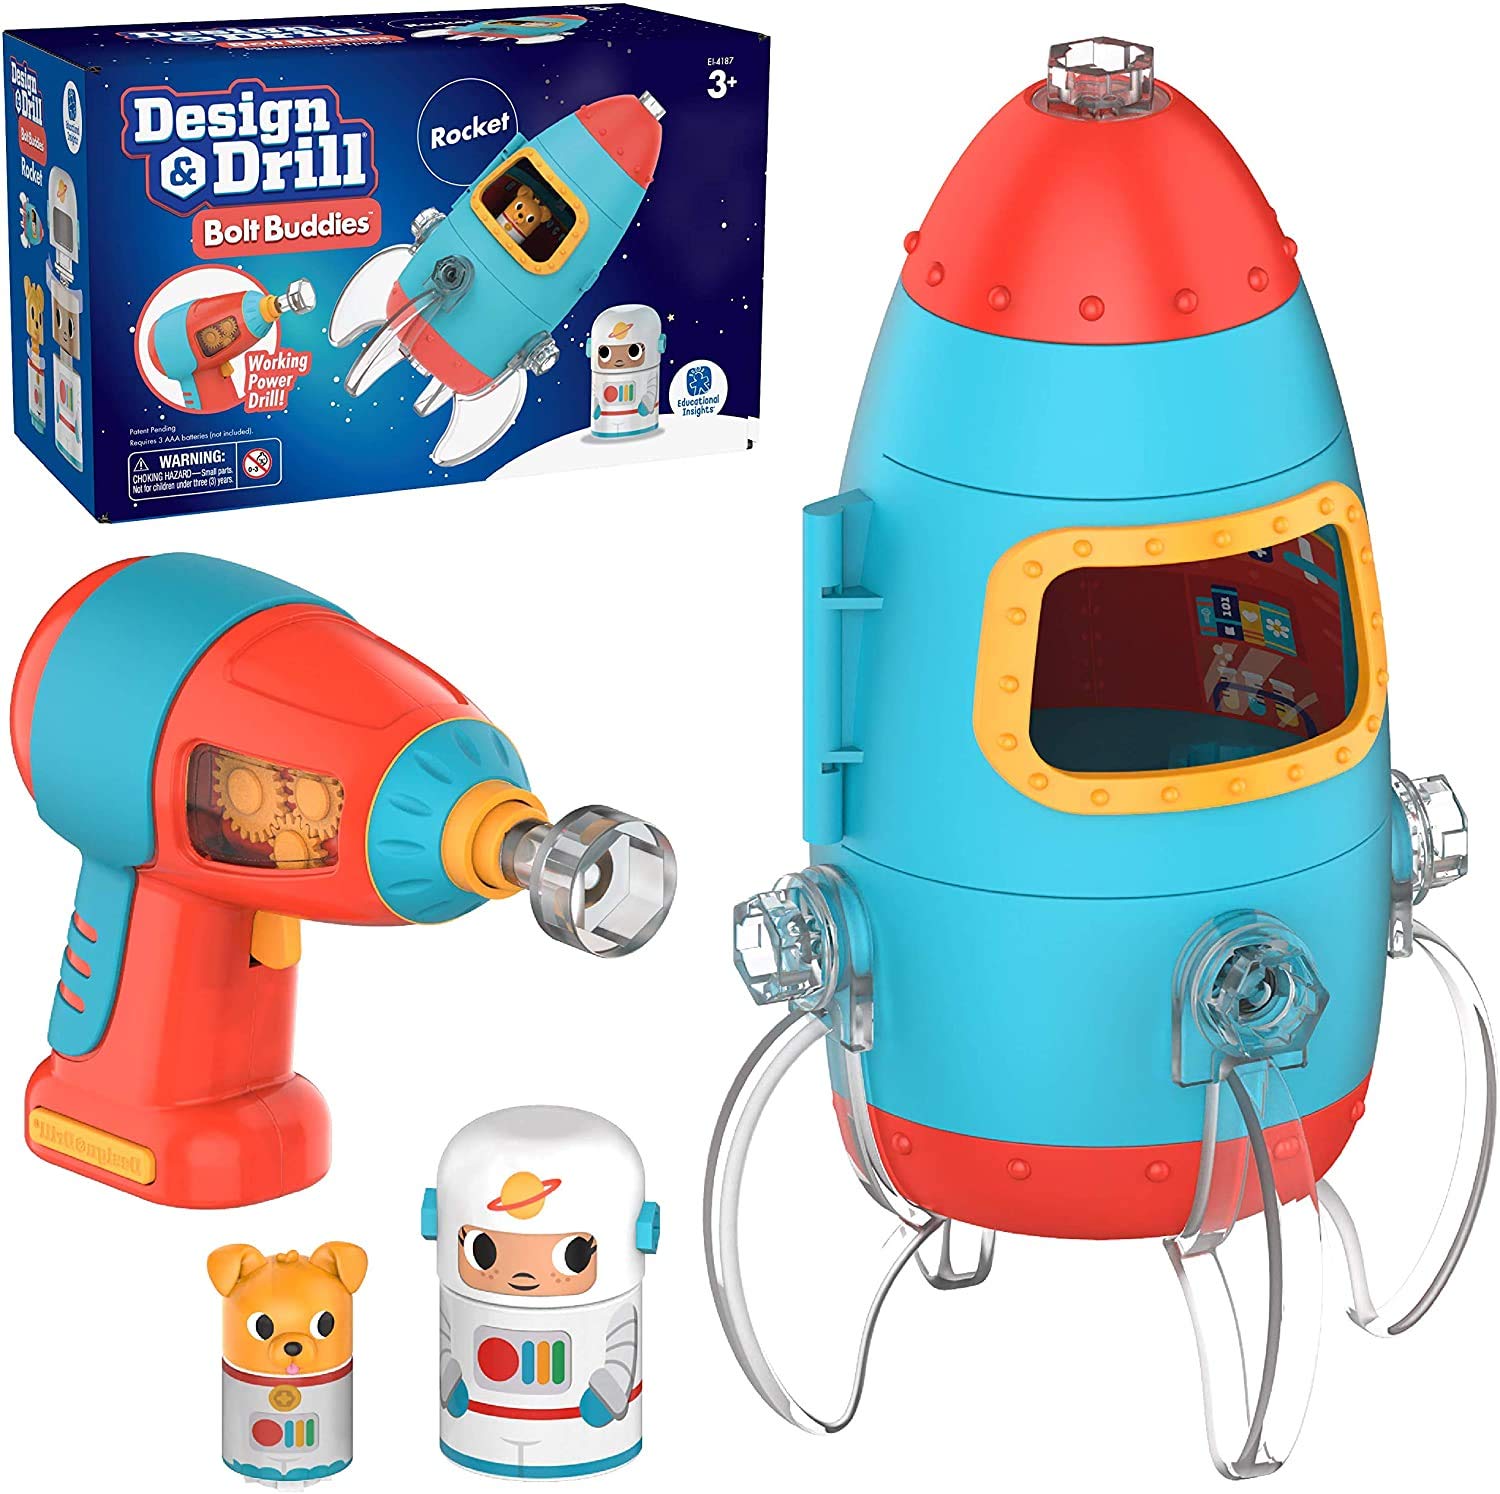 Educational Insights Design & Drill Bolt Buddies Rocket Perfect Drill Construction Playset $9.97 + Free Shipping w/ Prime or on $35+